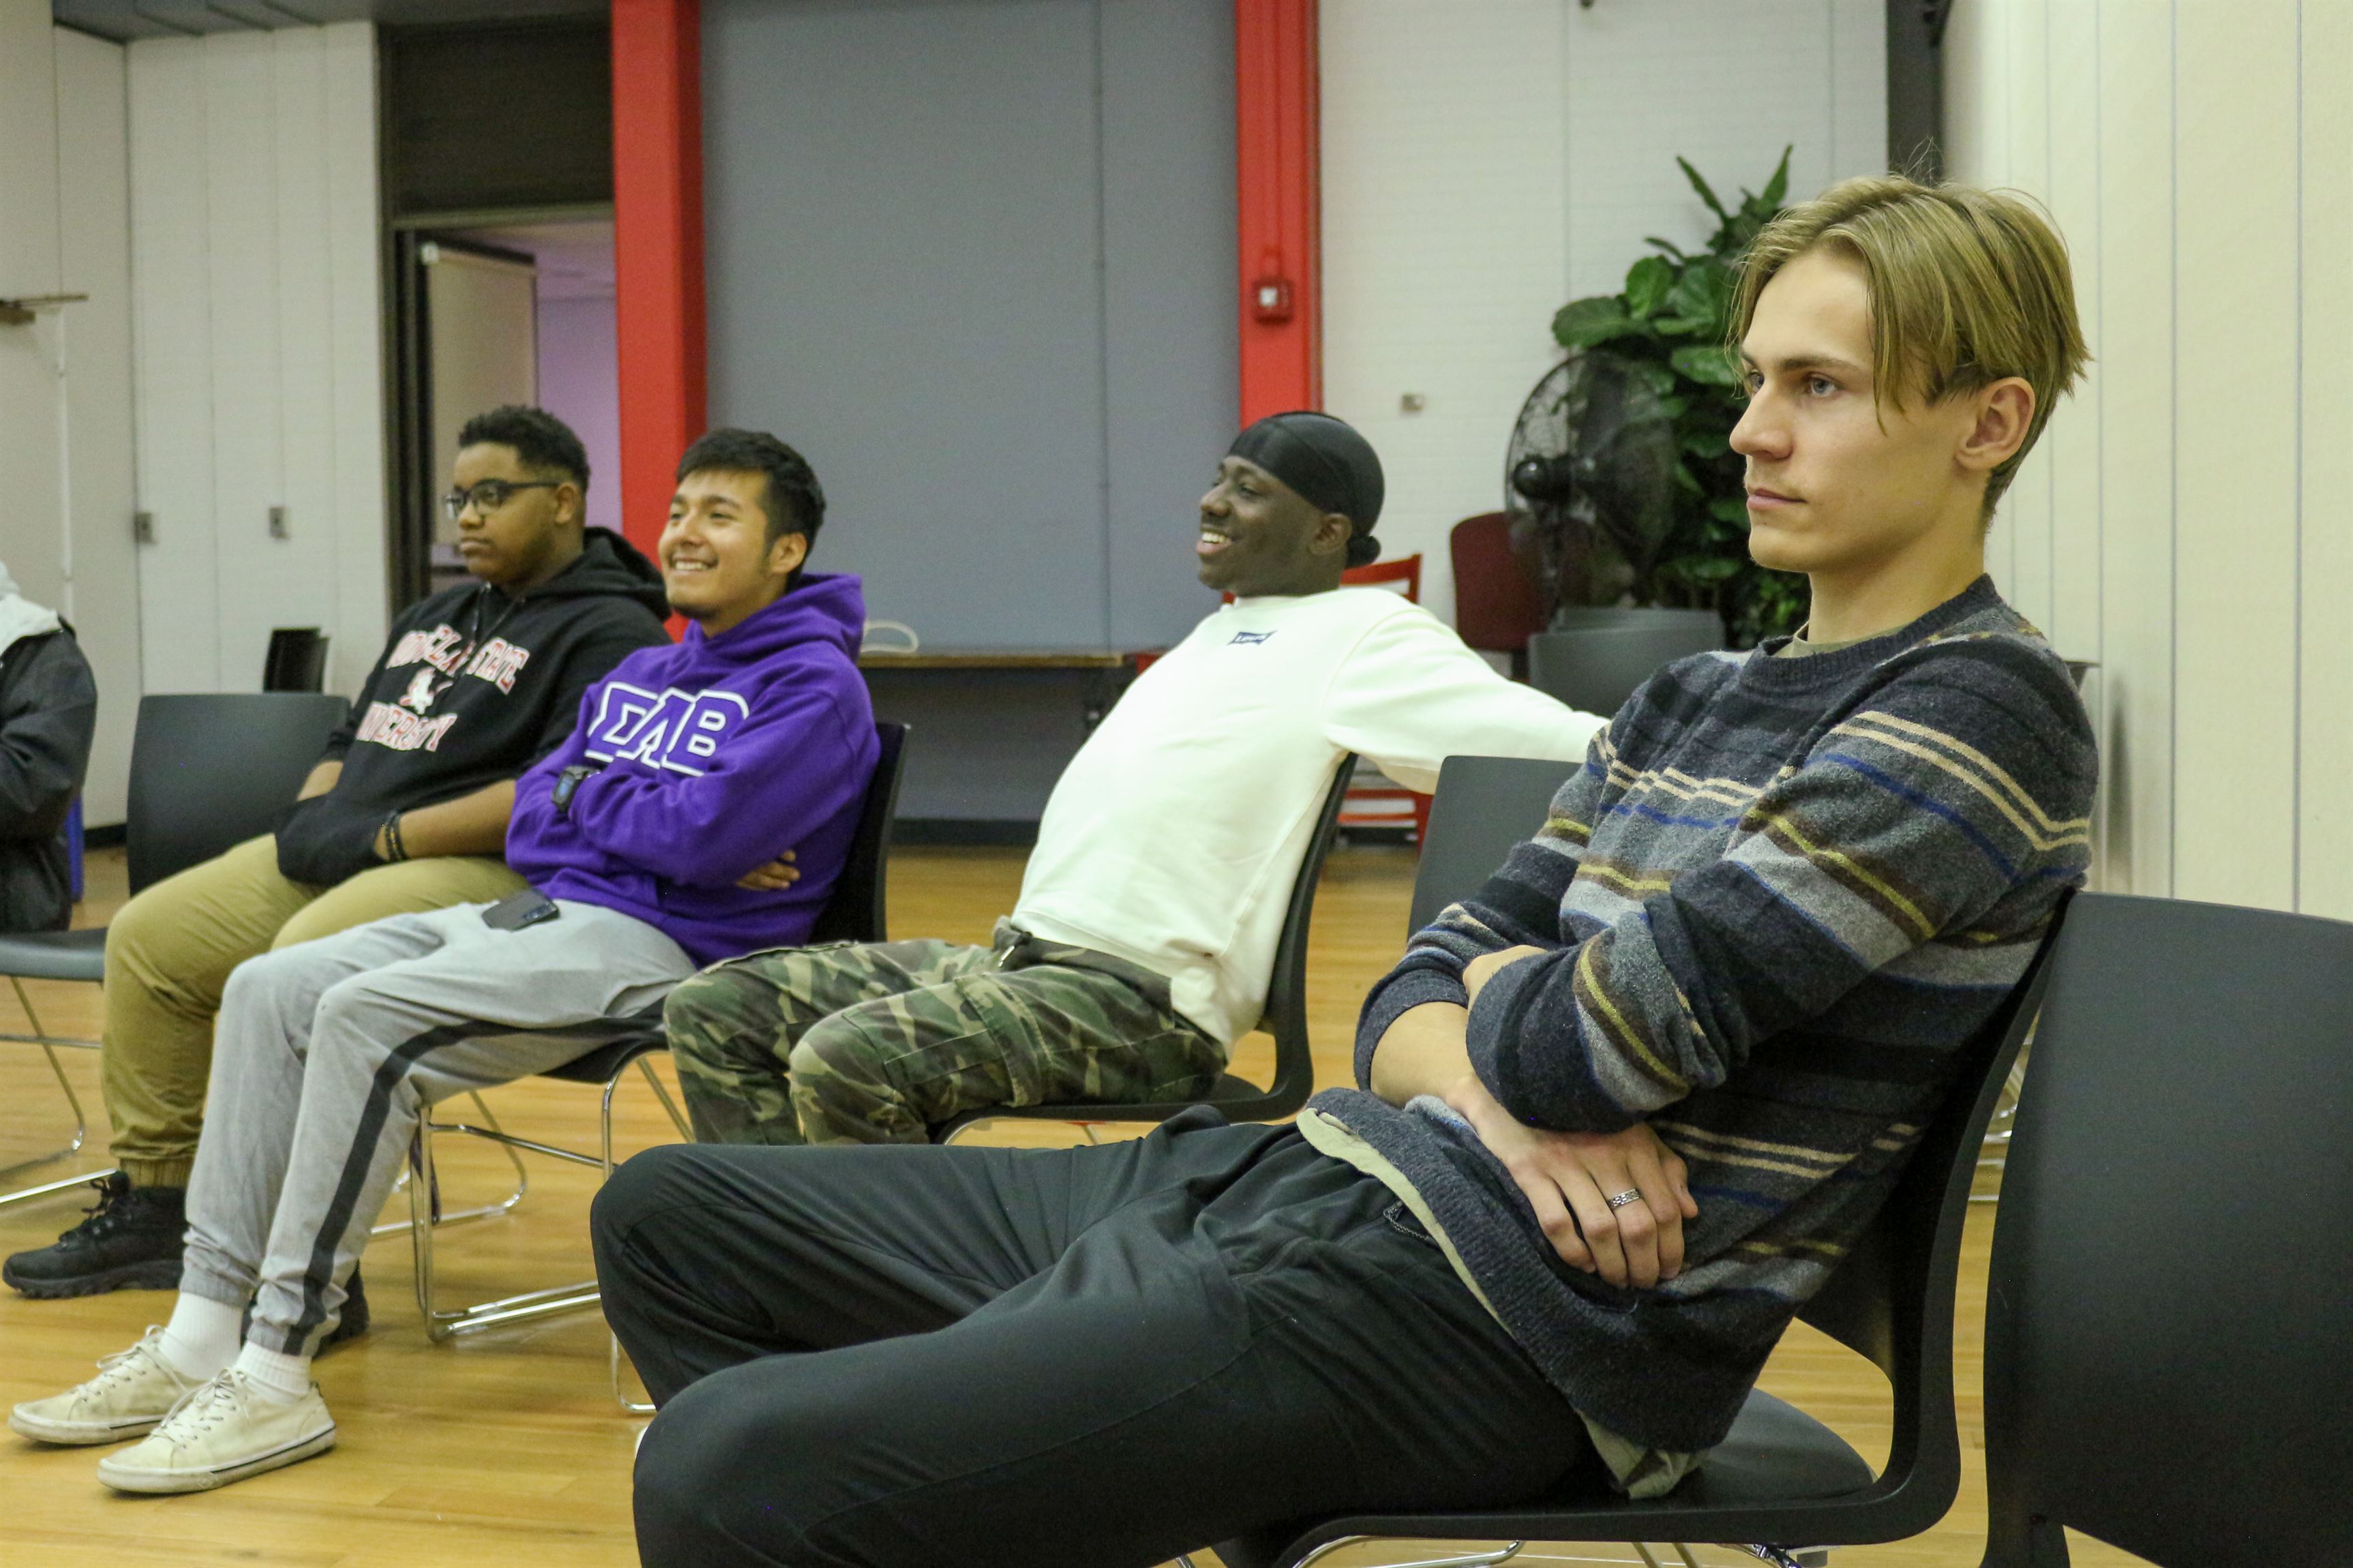 Students at the EOF Barbershop listen as the group discusses the day's topic.
Sal DiMaggio | The Montclarion